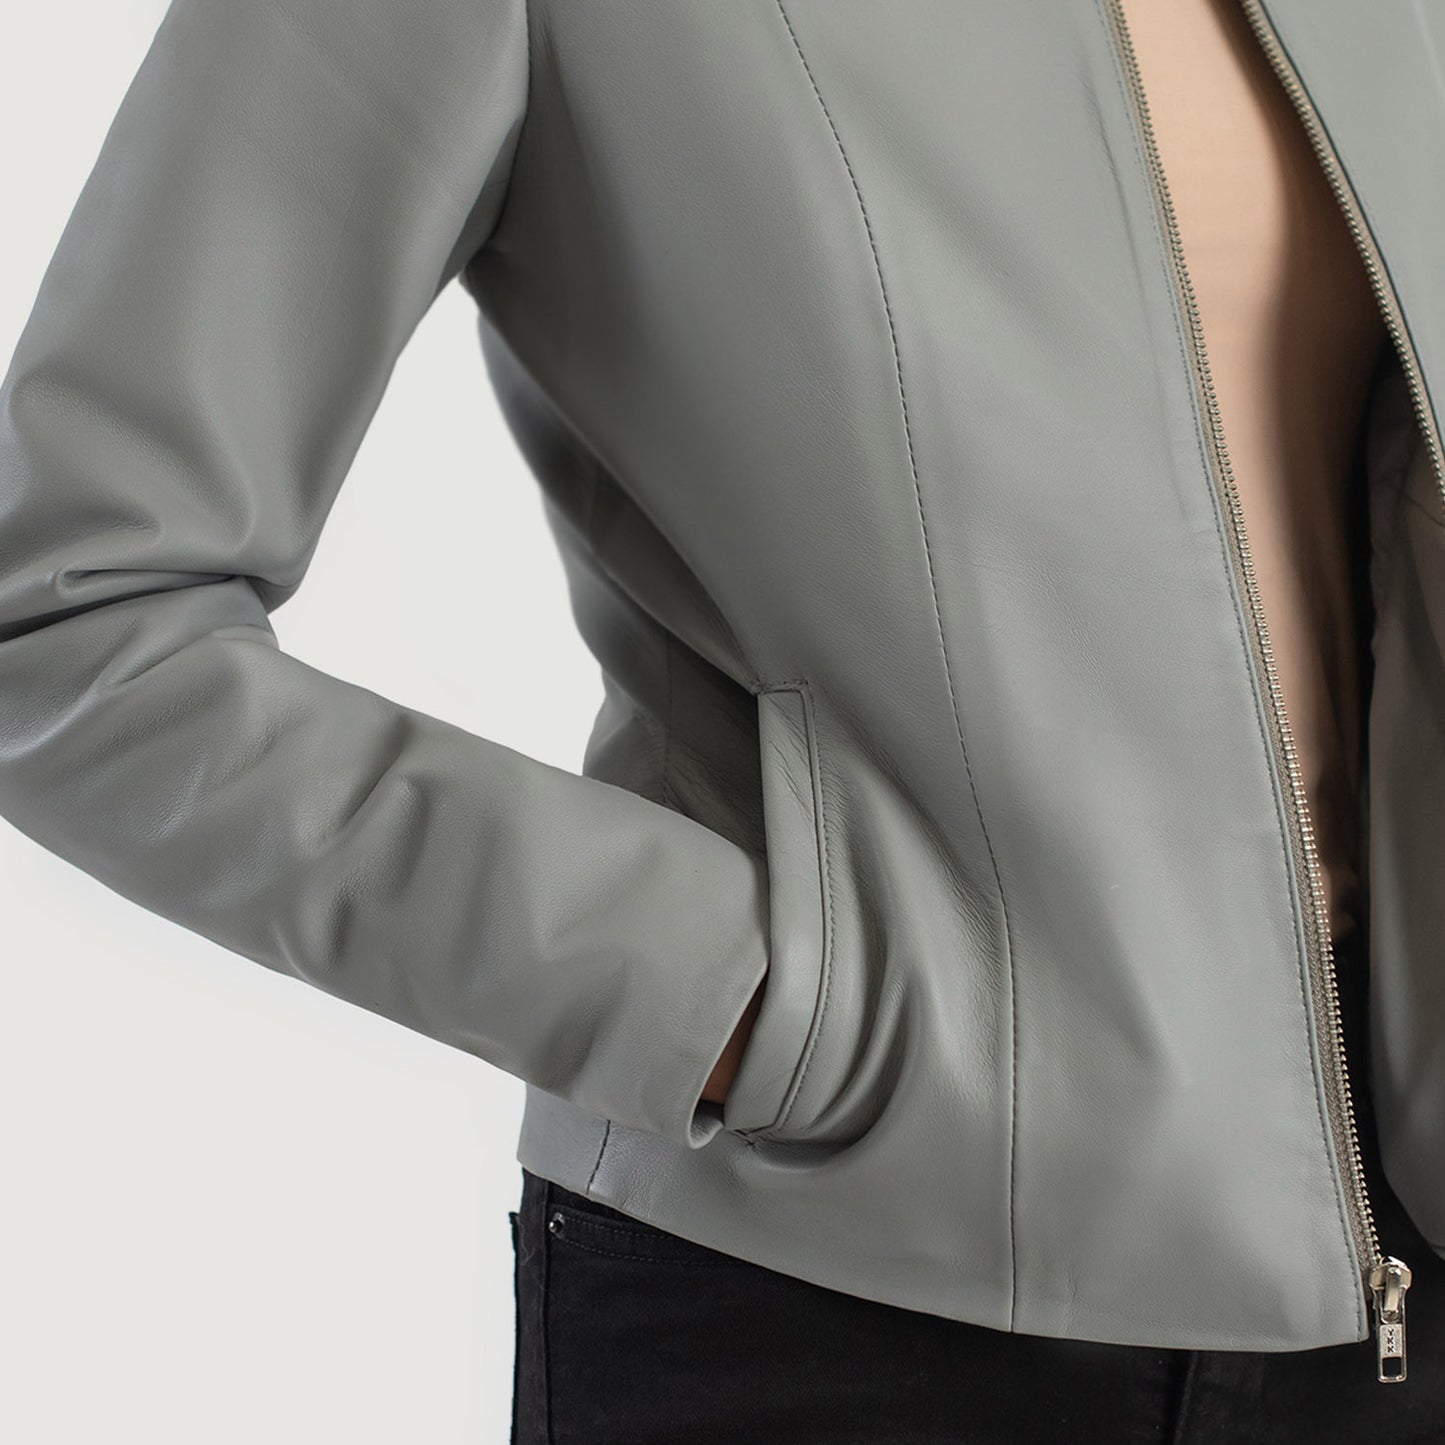 Buy Best Classic Looking Fashion Elixir Grey Collarless Leather Jacket